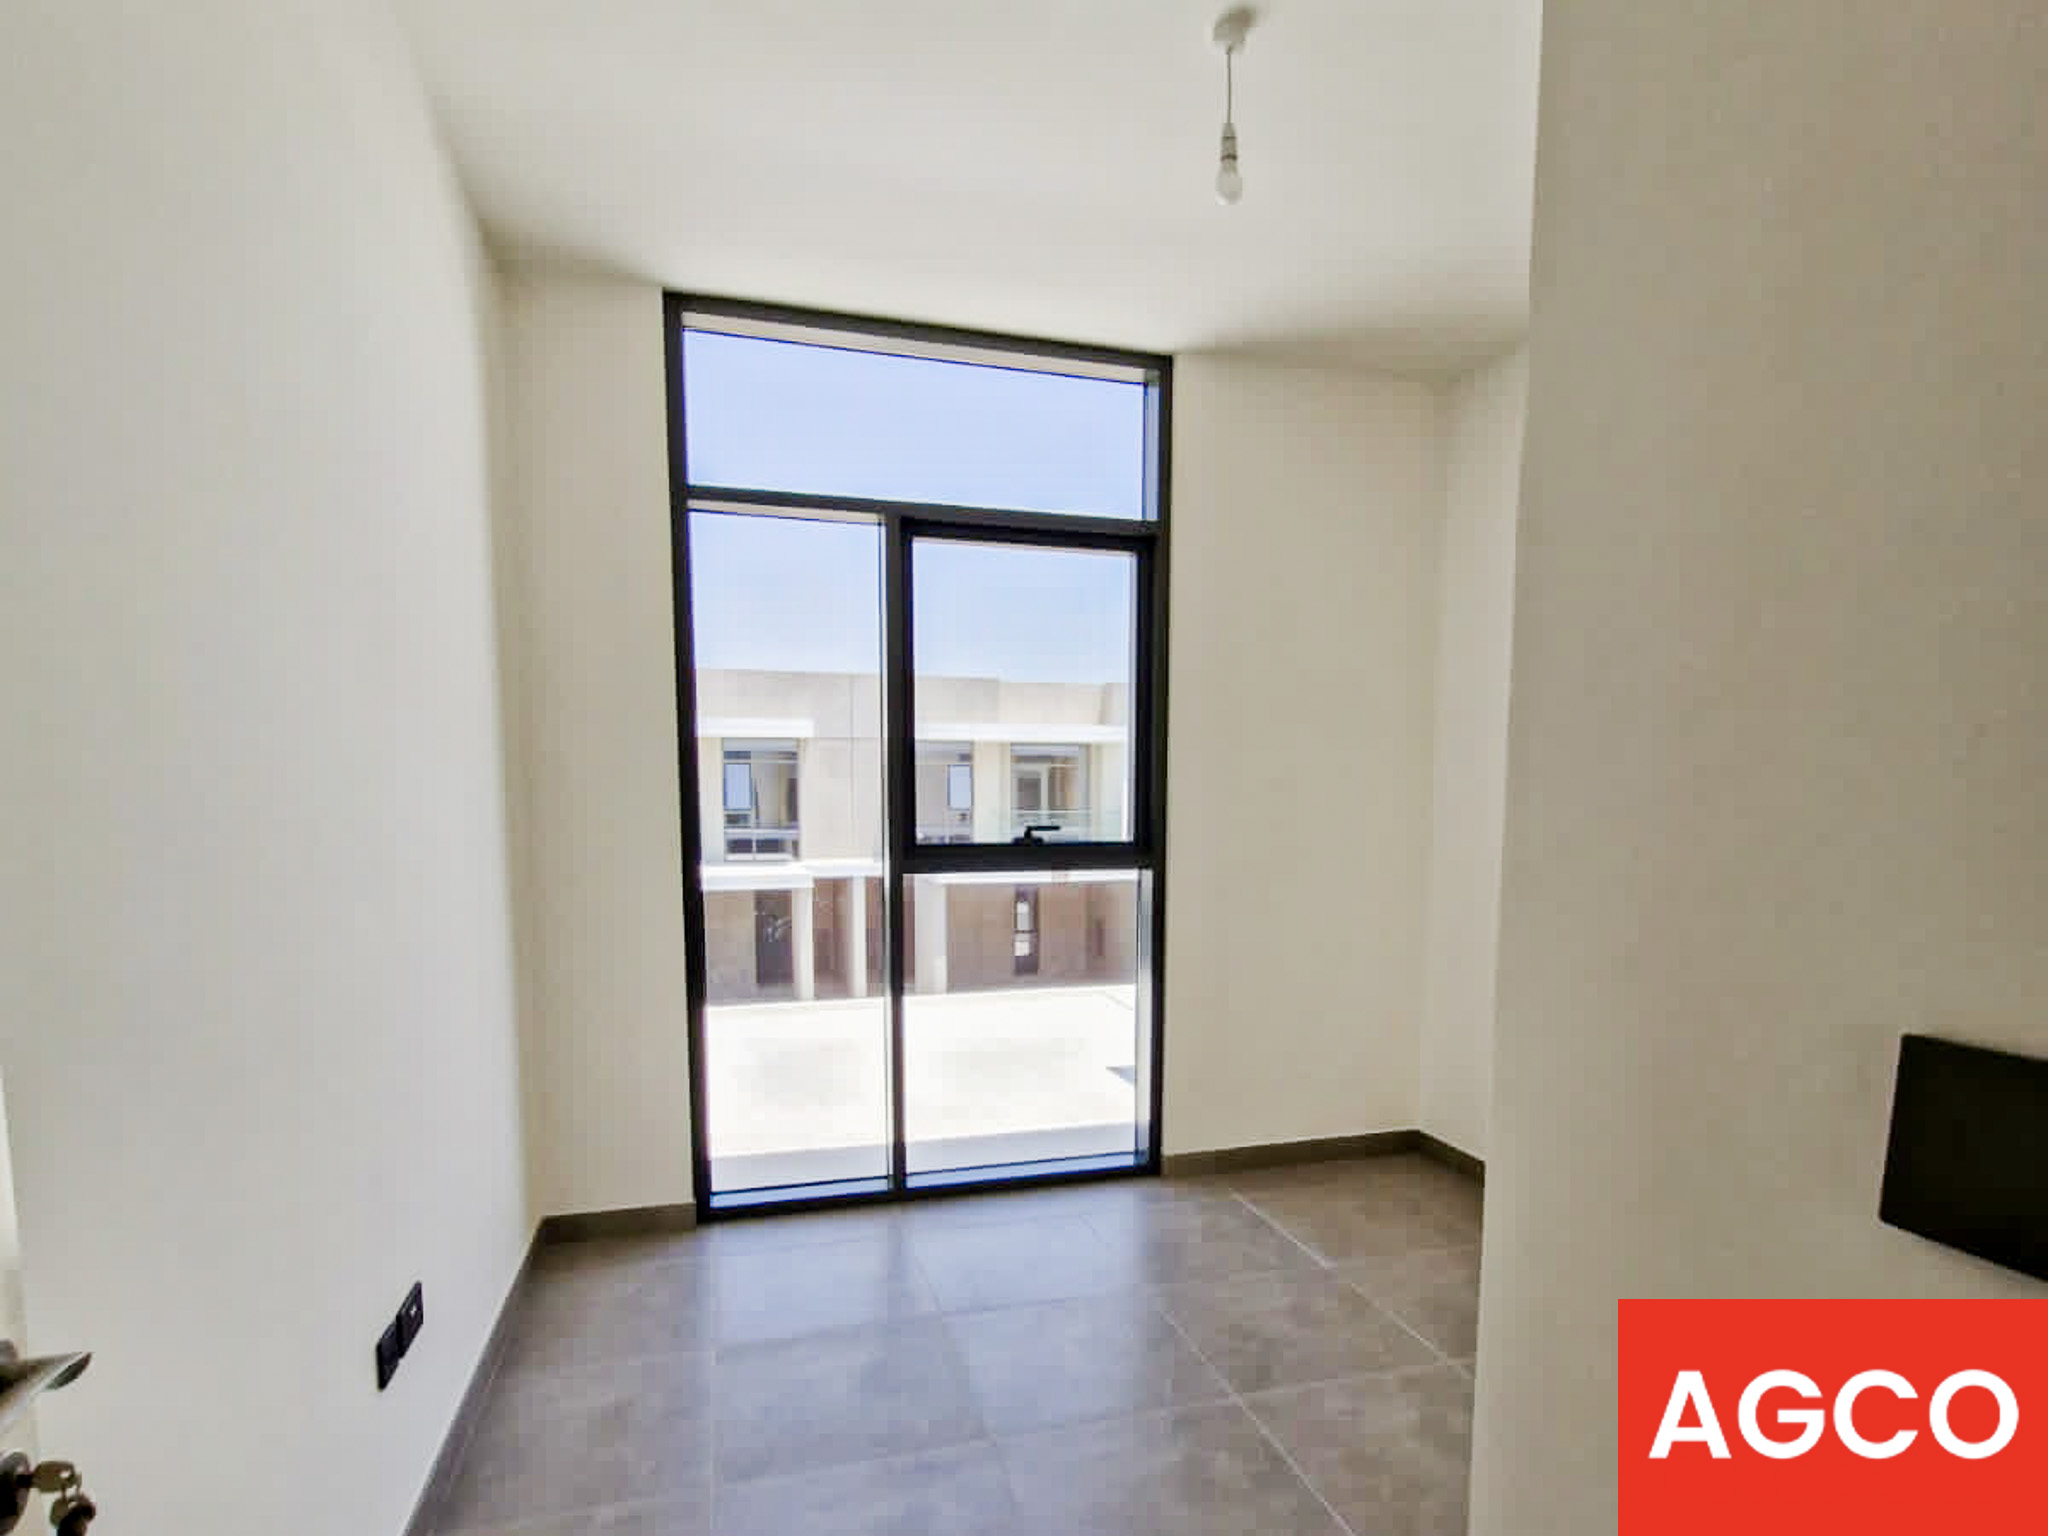 3-bedroom plus maid's room, brand new, close to amenities